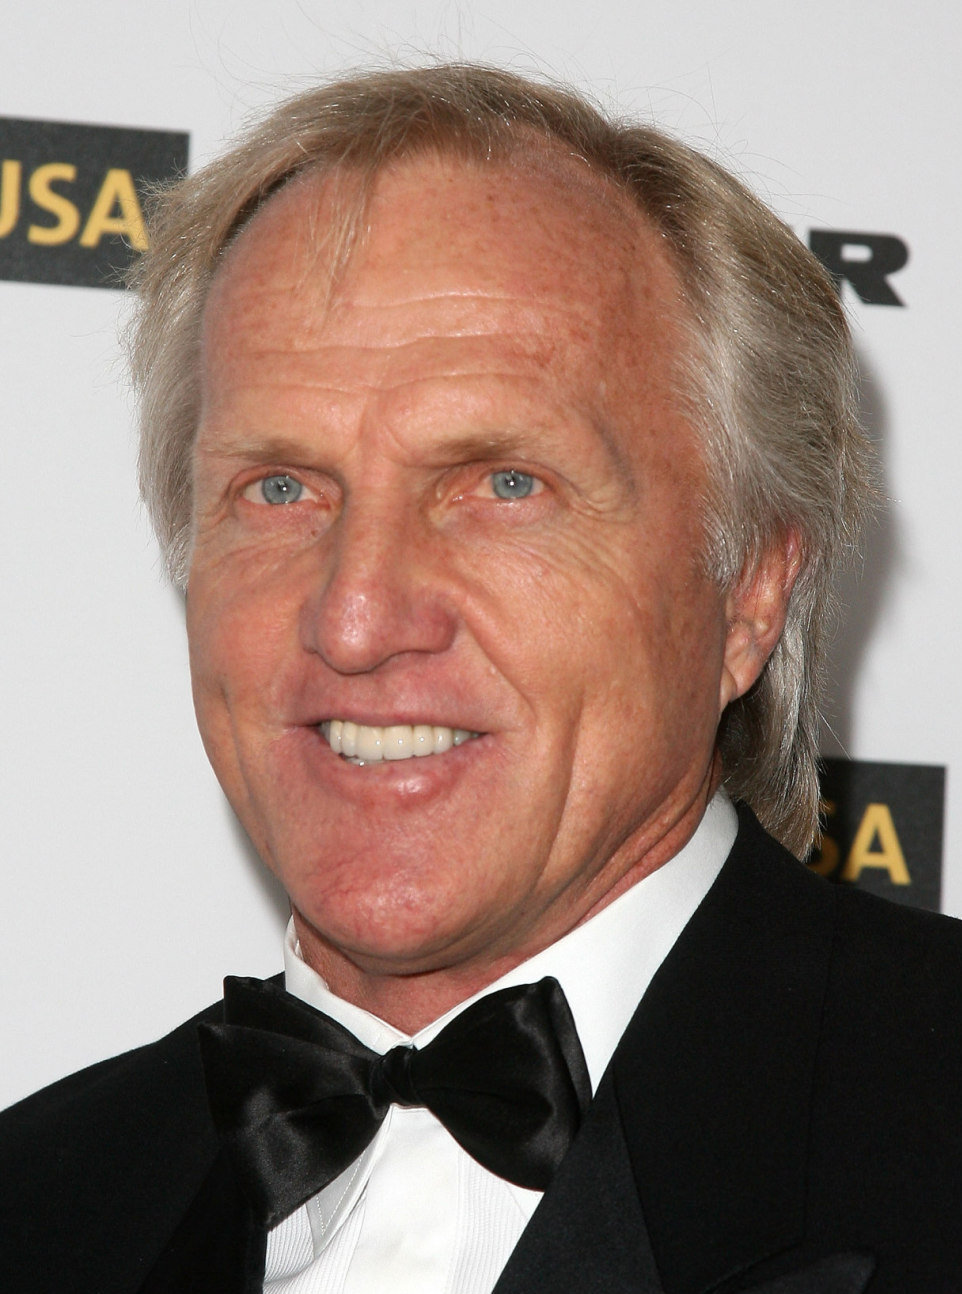 Australian Golfer Greg Norman is  the first and founding CEO  of LIV golf.